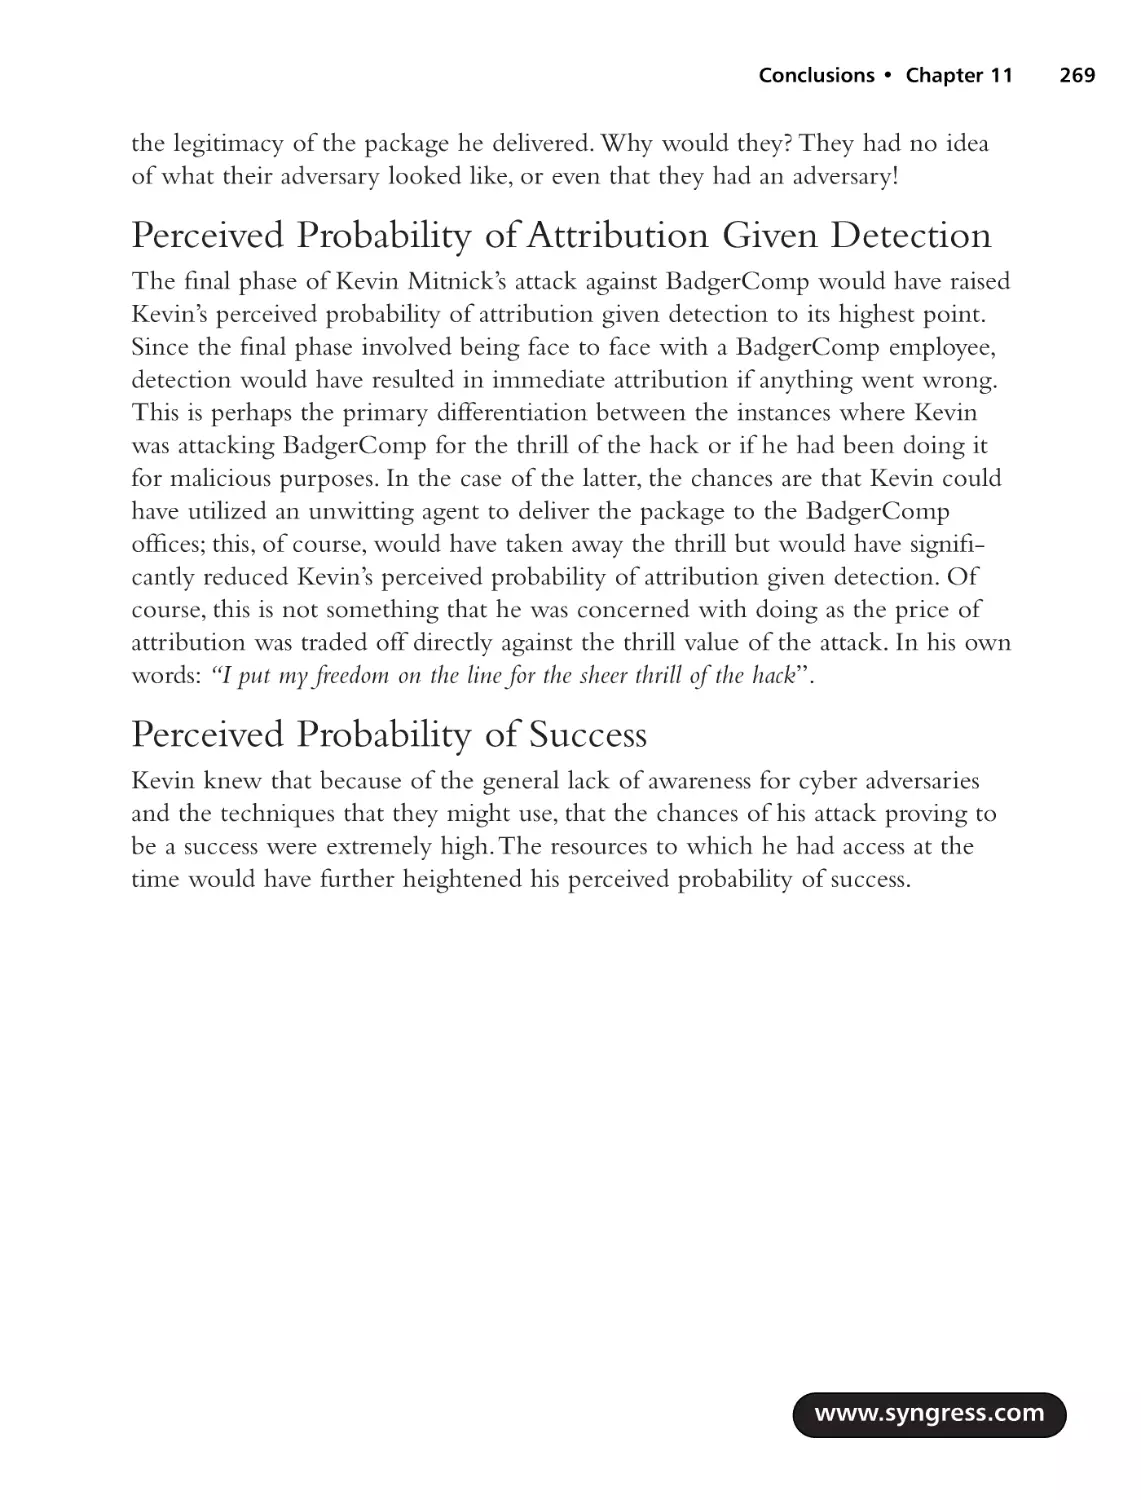 Perceived Probability of Attribution Given Detection
Perceived Probability of Success